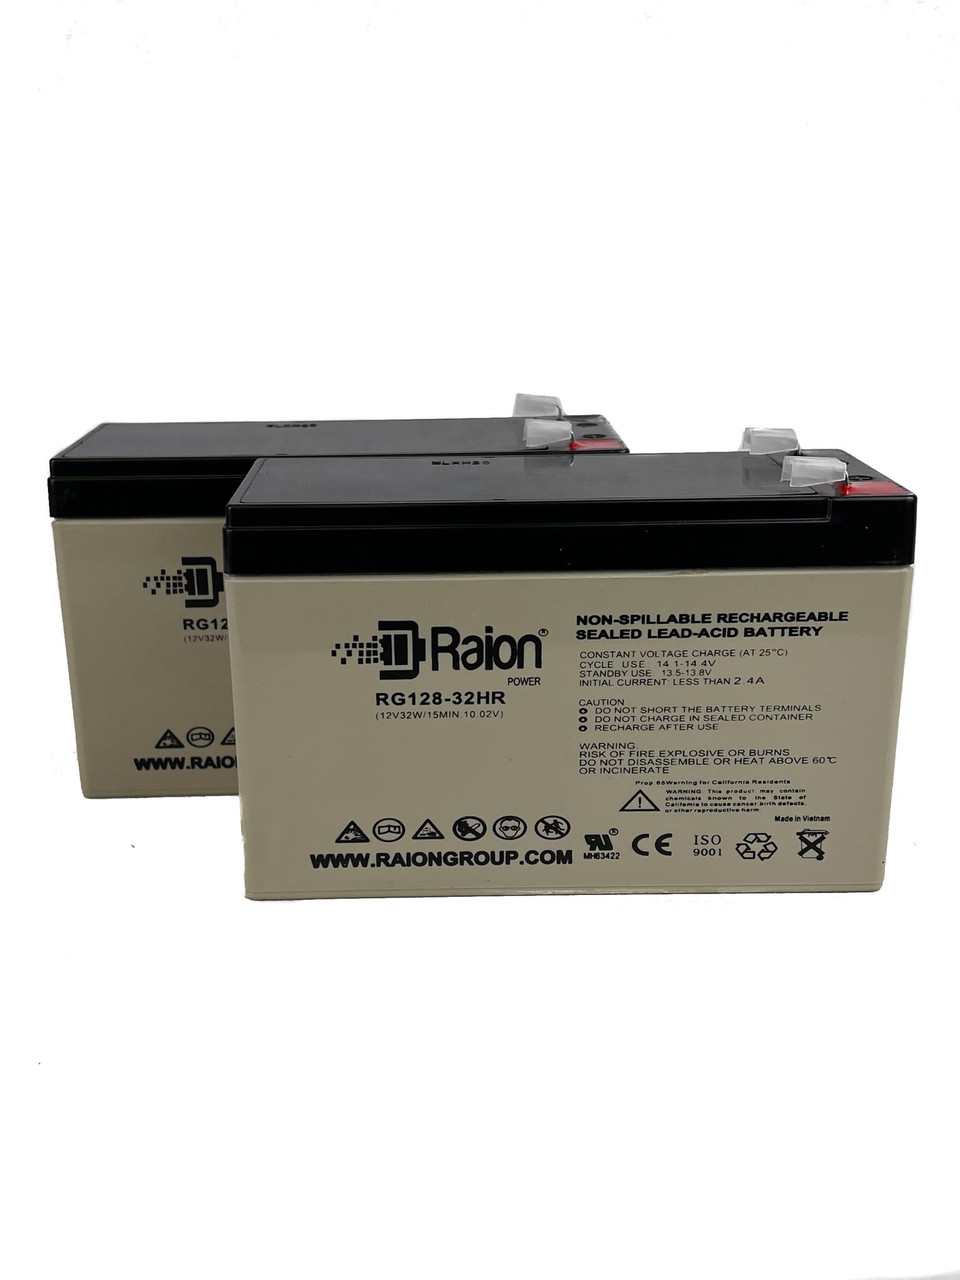 Raion Power Replacement 12V 7.5Ah High Rate Discharge Battery for SigmasTek SP12-7.5HR - 2 Pack